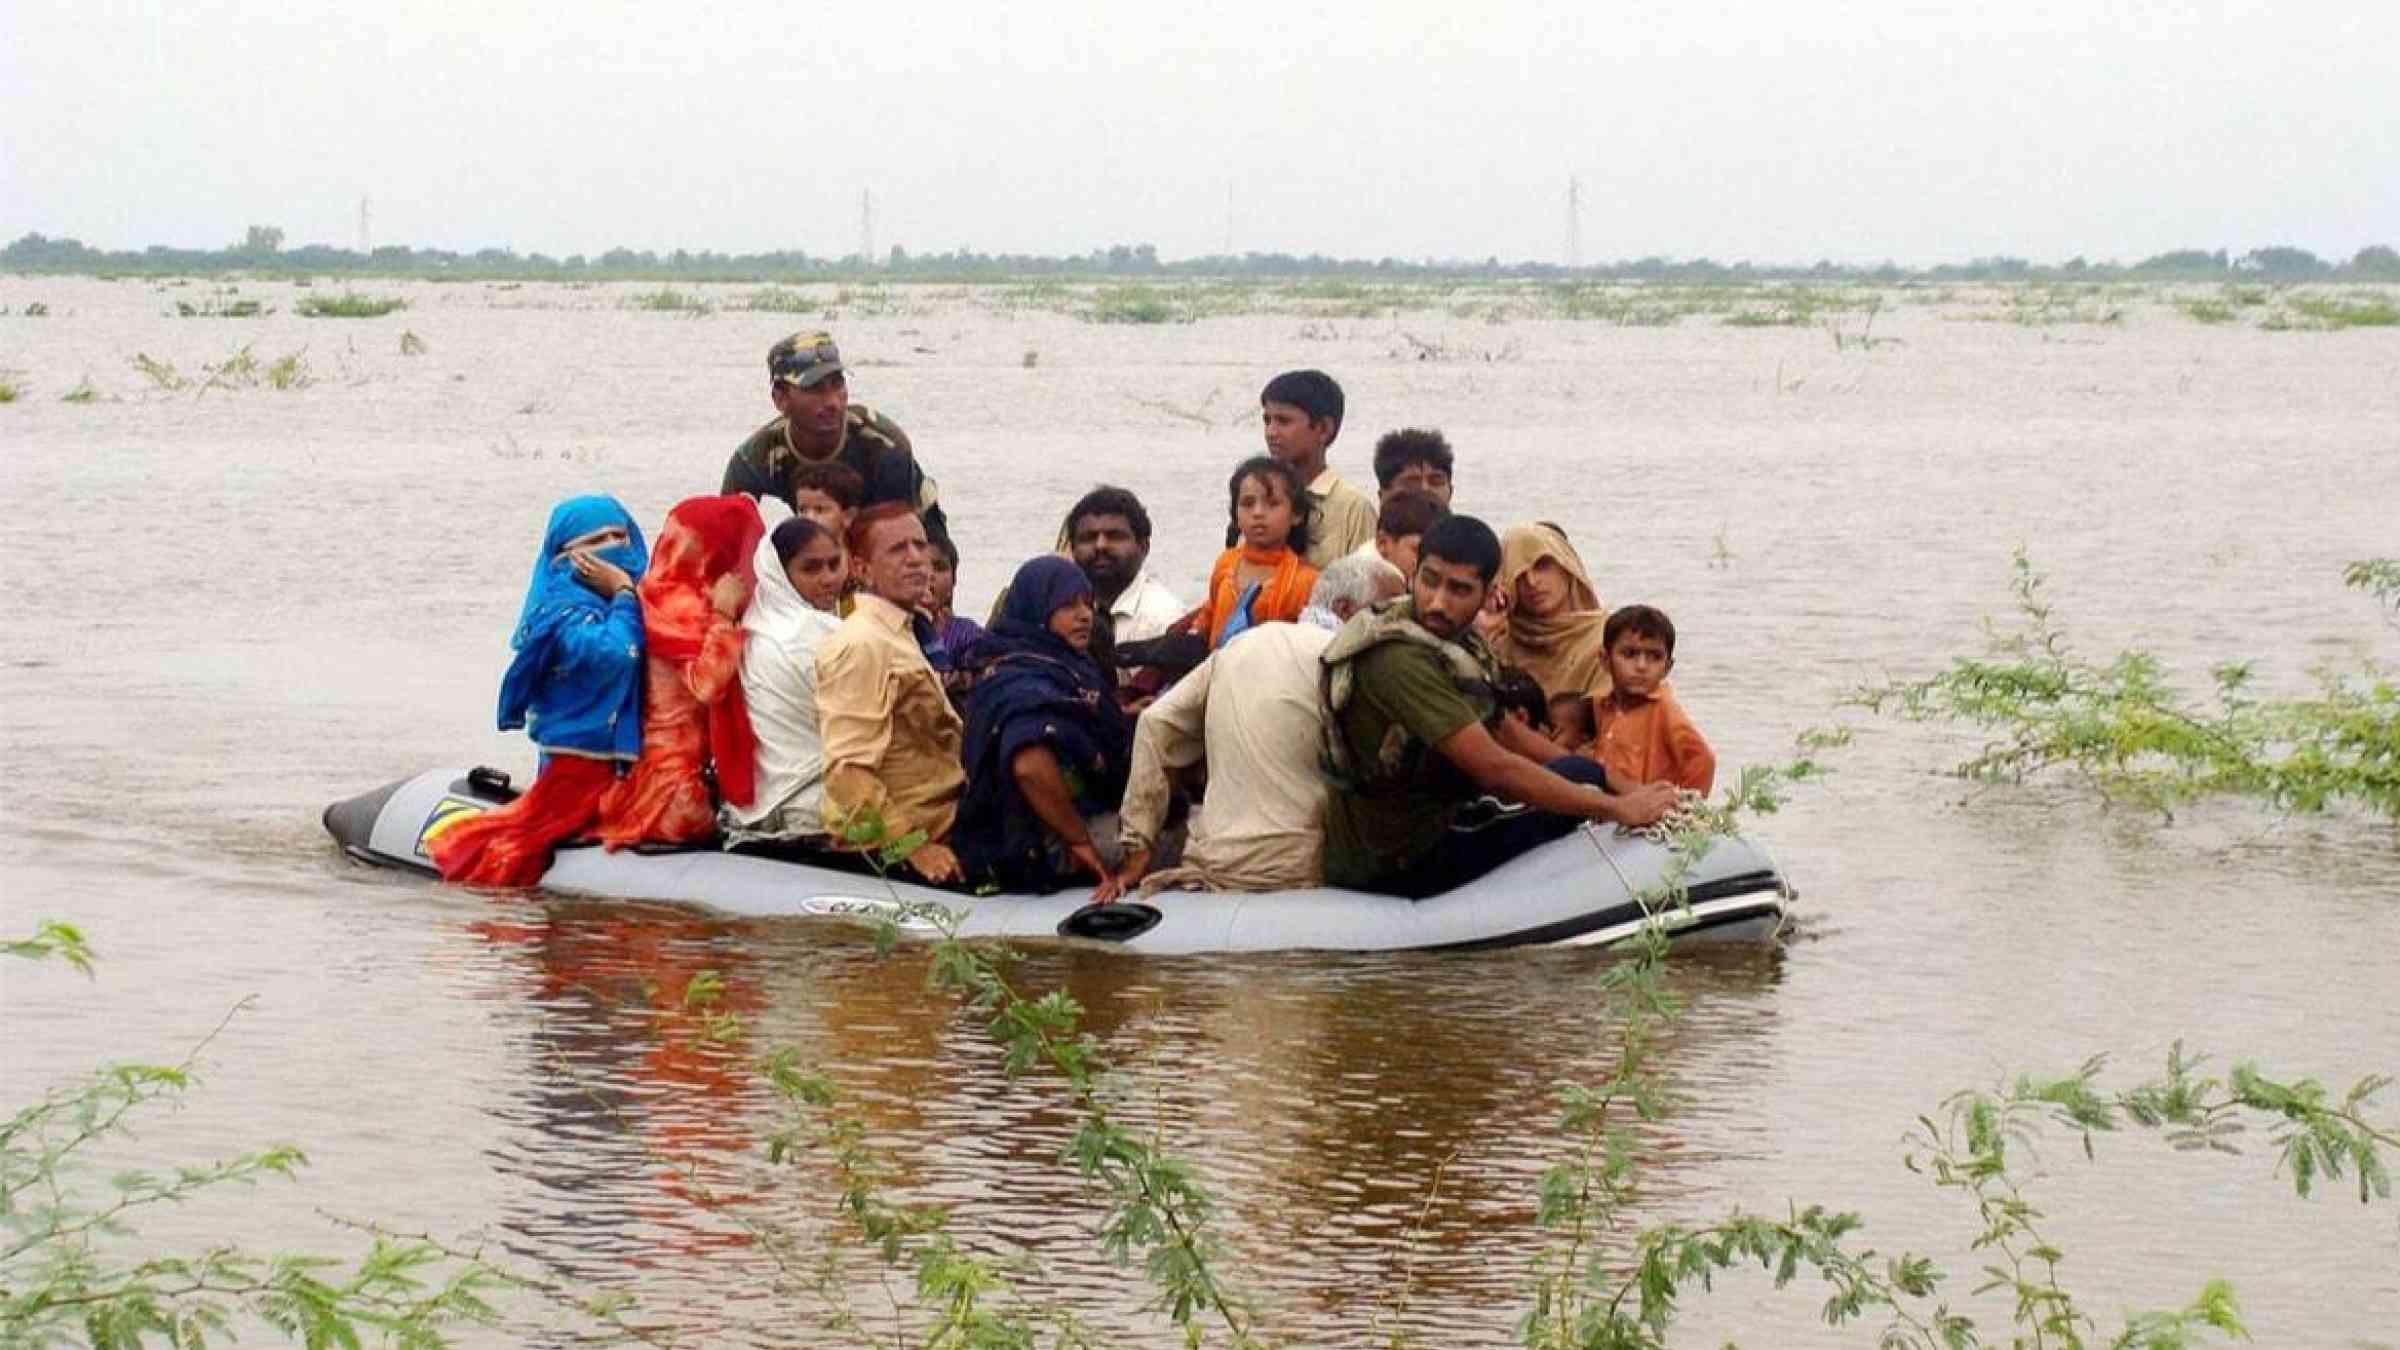 A group of civilians are moved to safety by boat amid deep floods in Badin, Pakistan